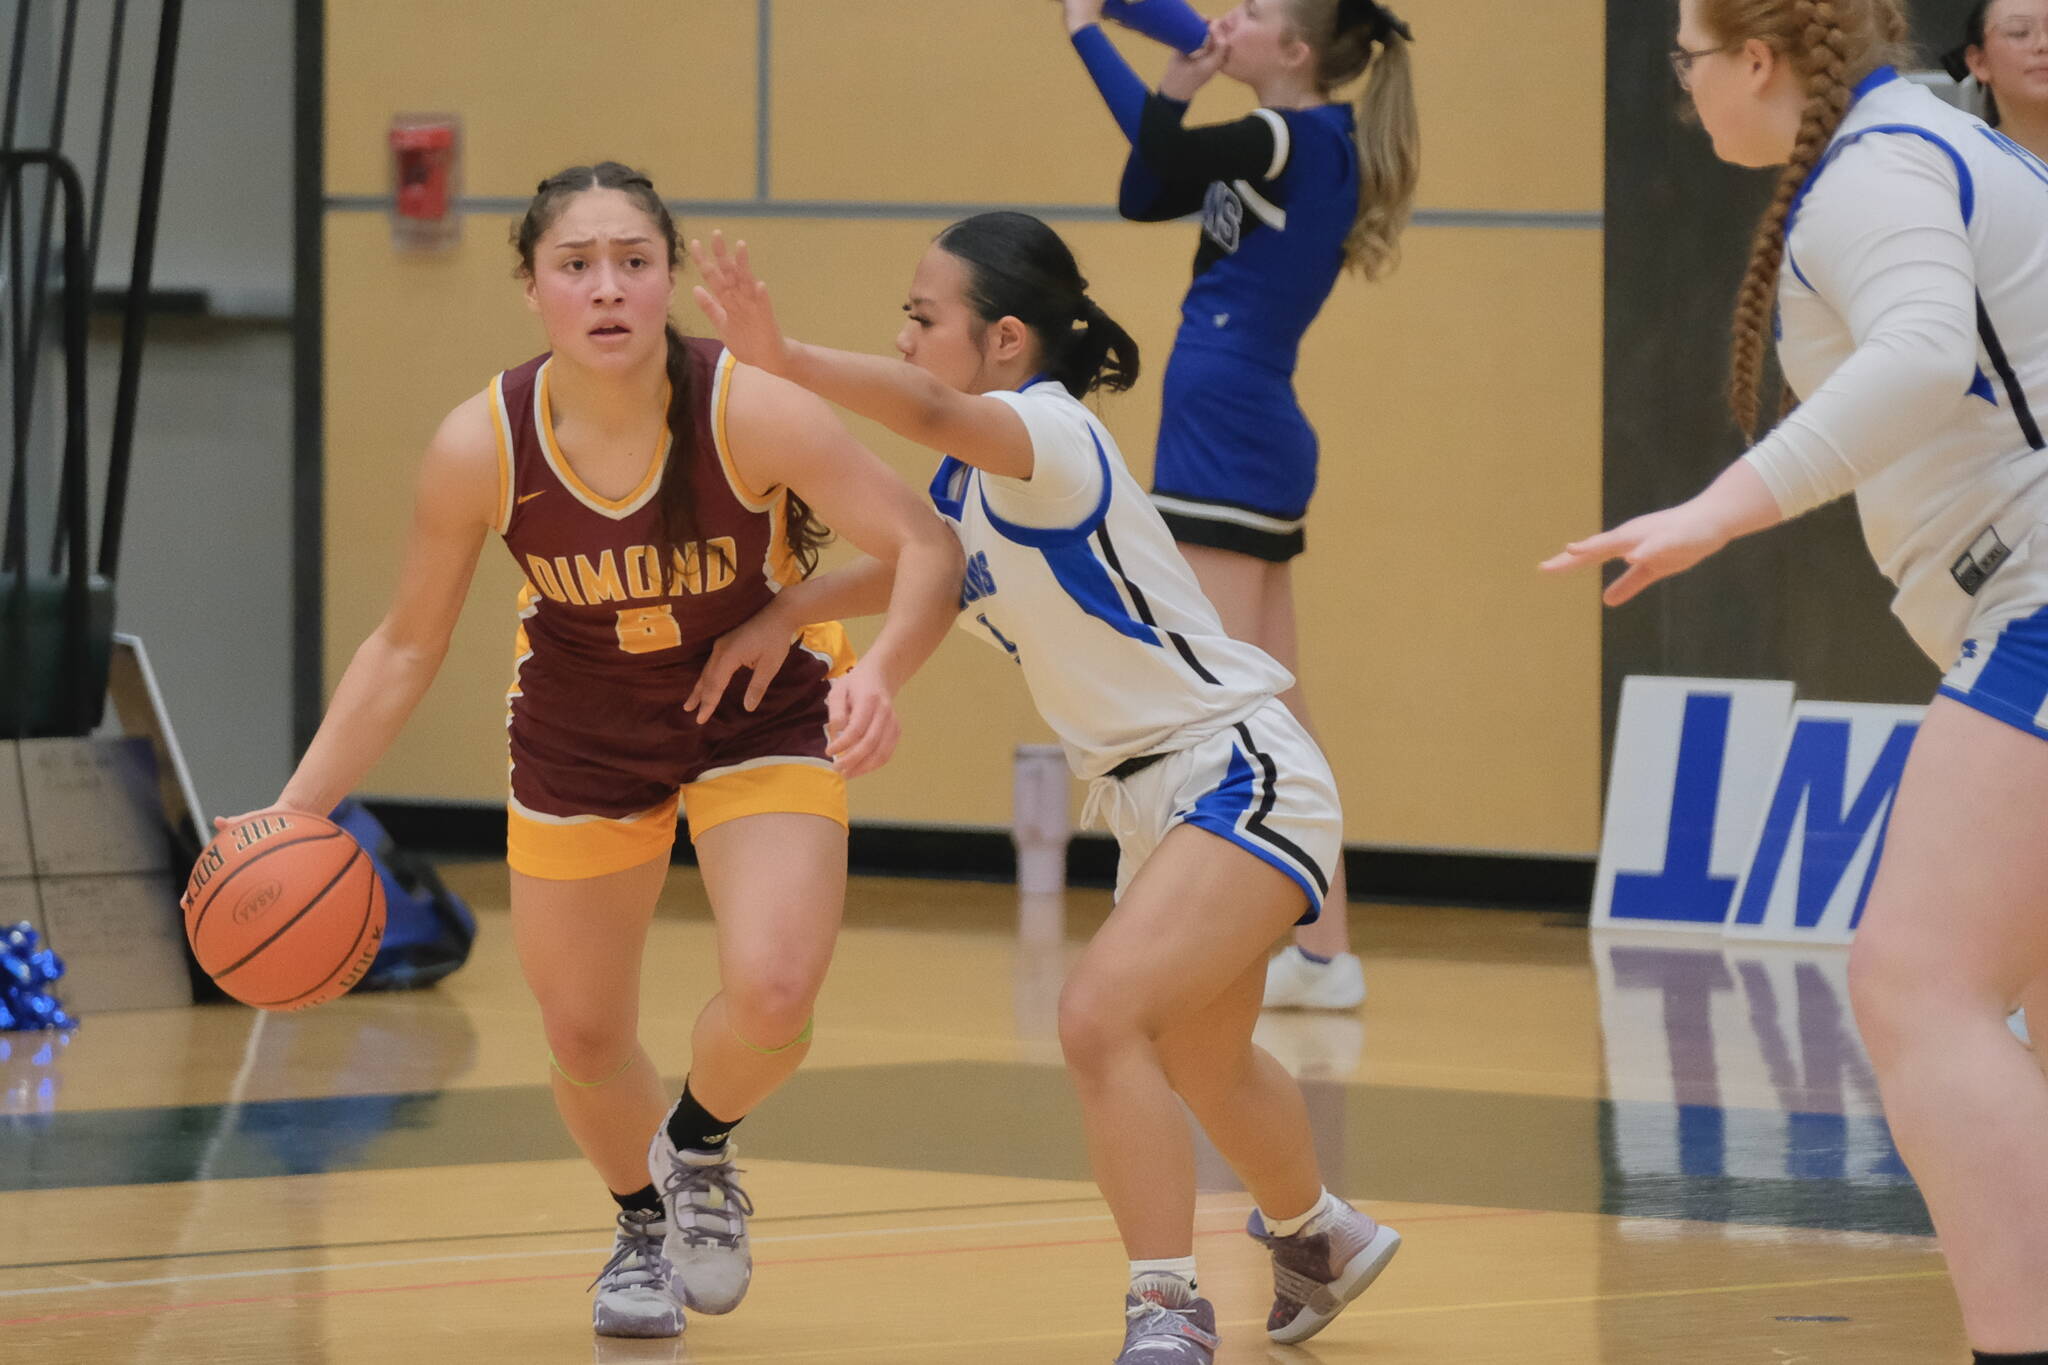 Thunder Mountain senior Jaya Carandang defends Dimond senior Maile Wilcox (5) during the Falcons 58-47 win over the Lynx in the 2024 ASAA March Madness Alaska 4A Girls Basketball State Championships on Wednesday at Anchorage’s Alaska Airlines Center. (Klas Stolpe / For the Juneau Empire)